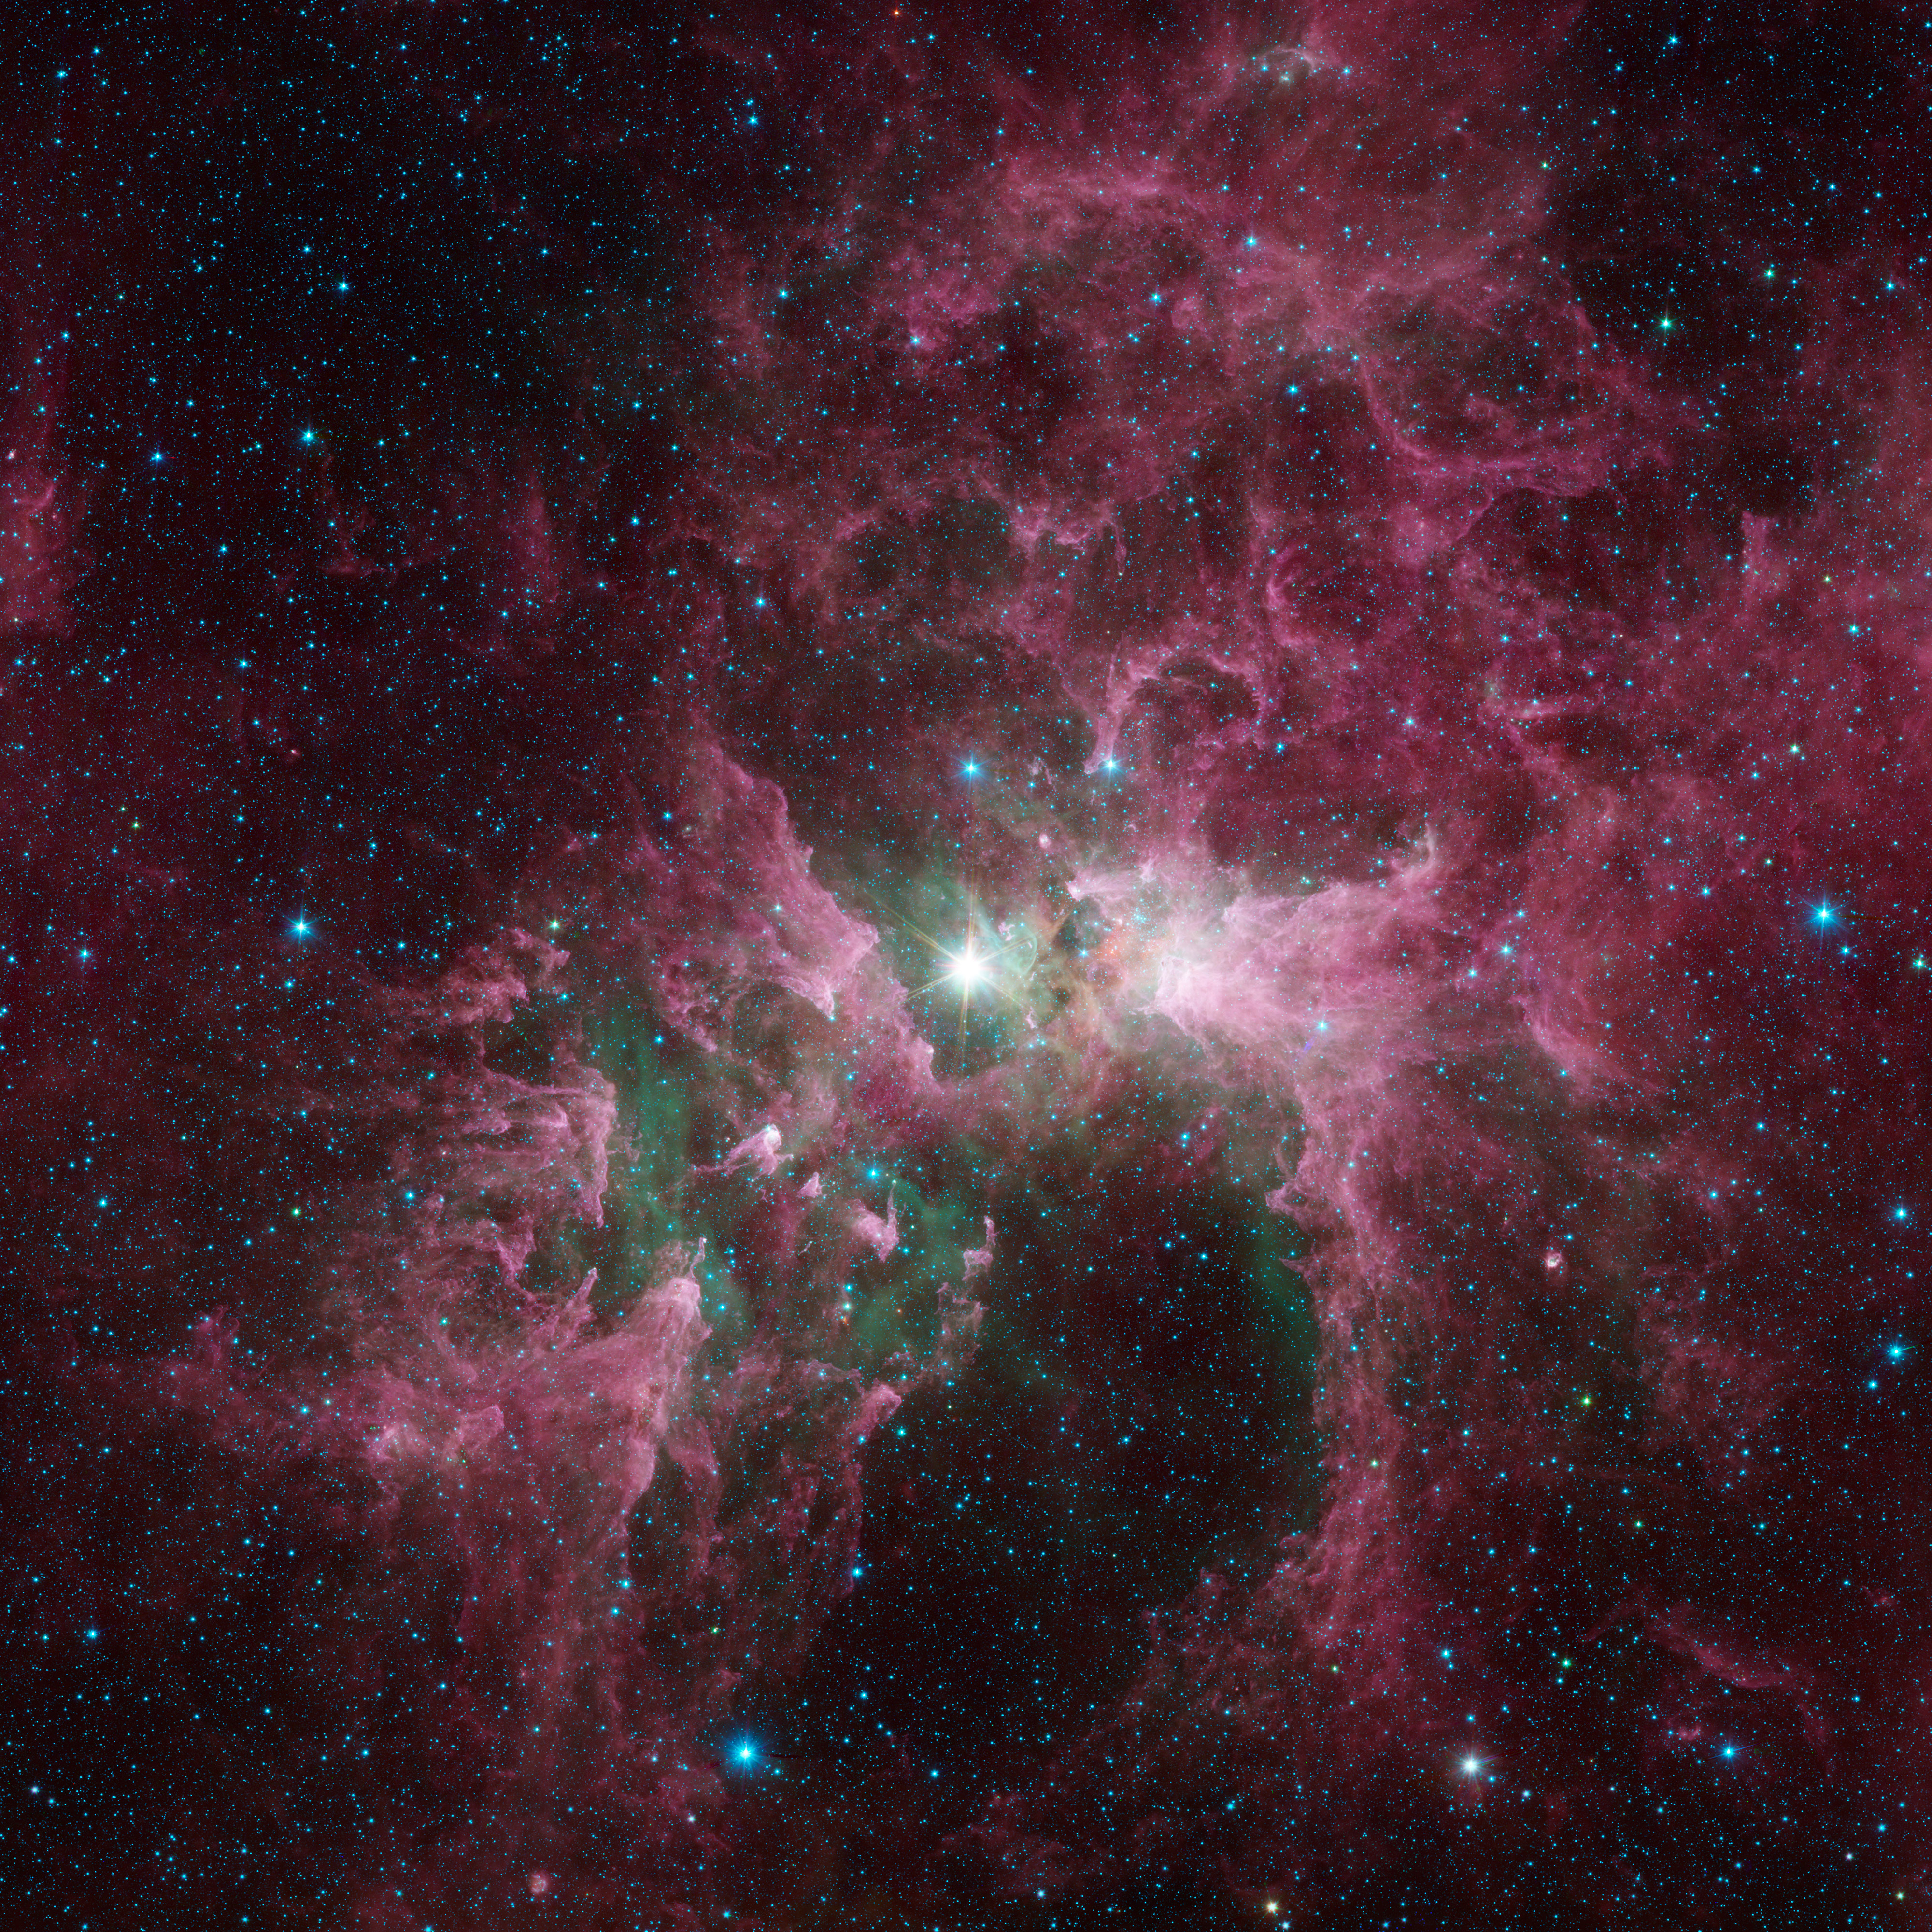 Tortured Clouds of Eta Carinae: Massive stars can wreak havoc on their surroundings, as can be seen in this new view of the Carina Nebula from the Spitzer Space Telescope. Credit: NASA/JPL-Caltech